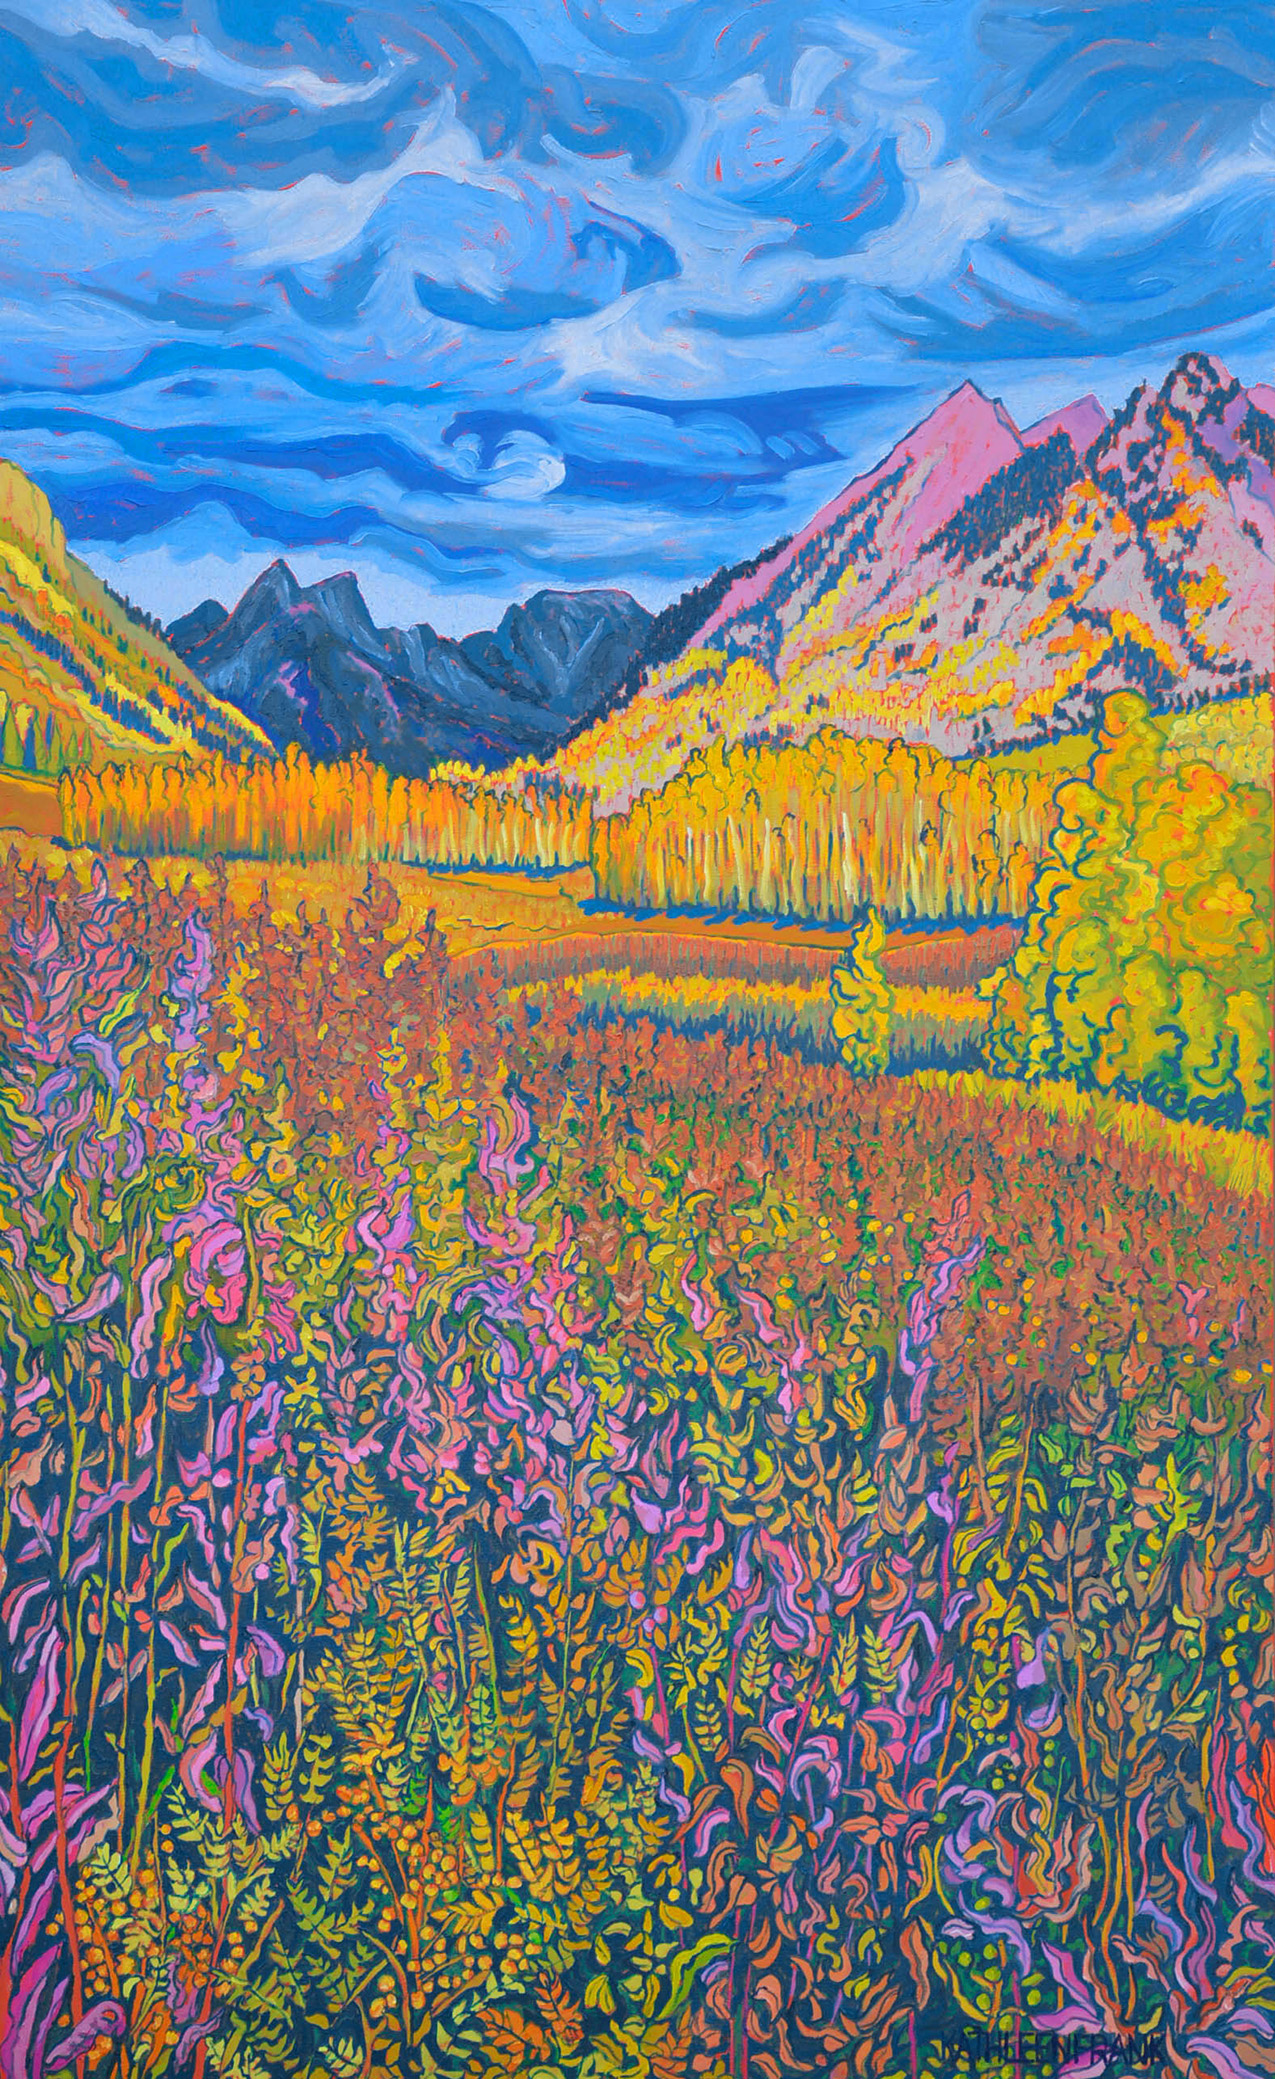 vertical oil painting with brilliant colors. the foreground is a field full of wildflowers, leading to stands of trees and mountains under a swirly unsettled sky.